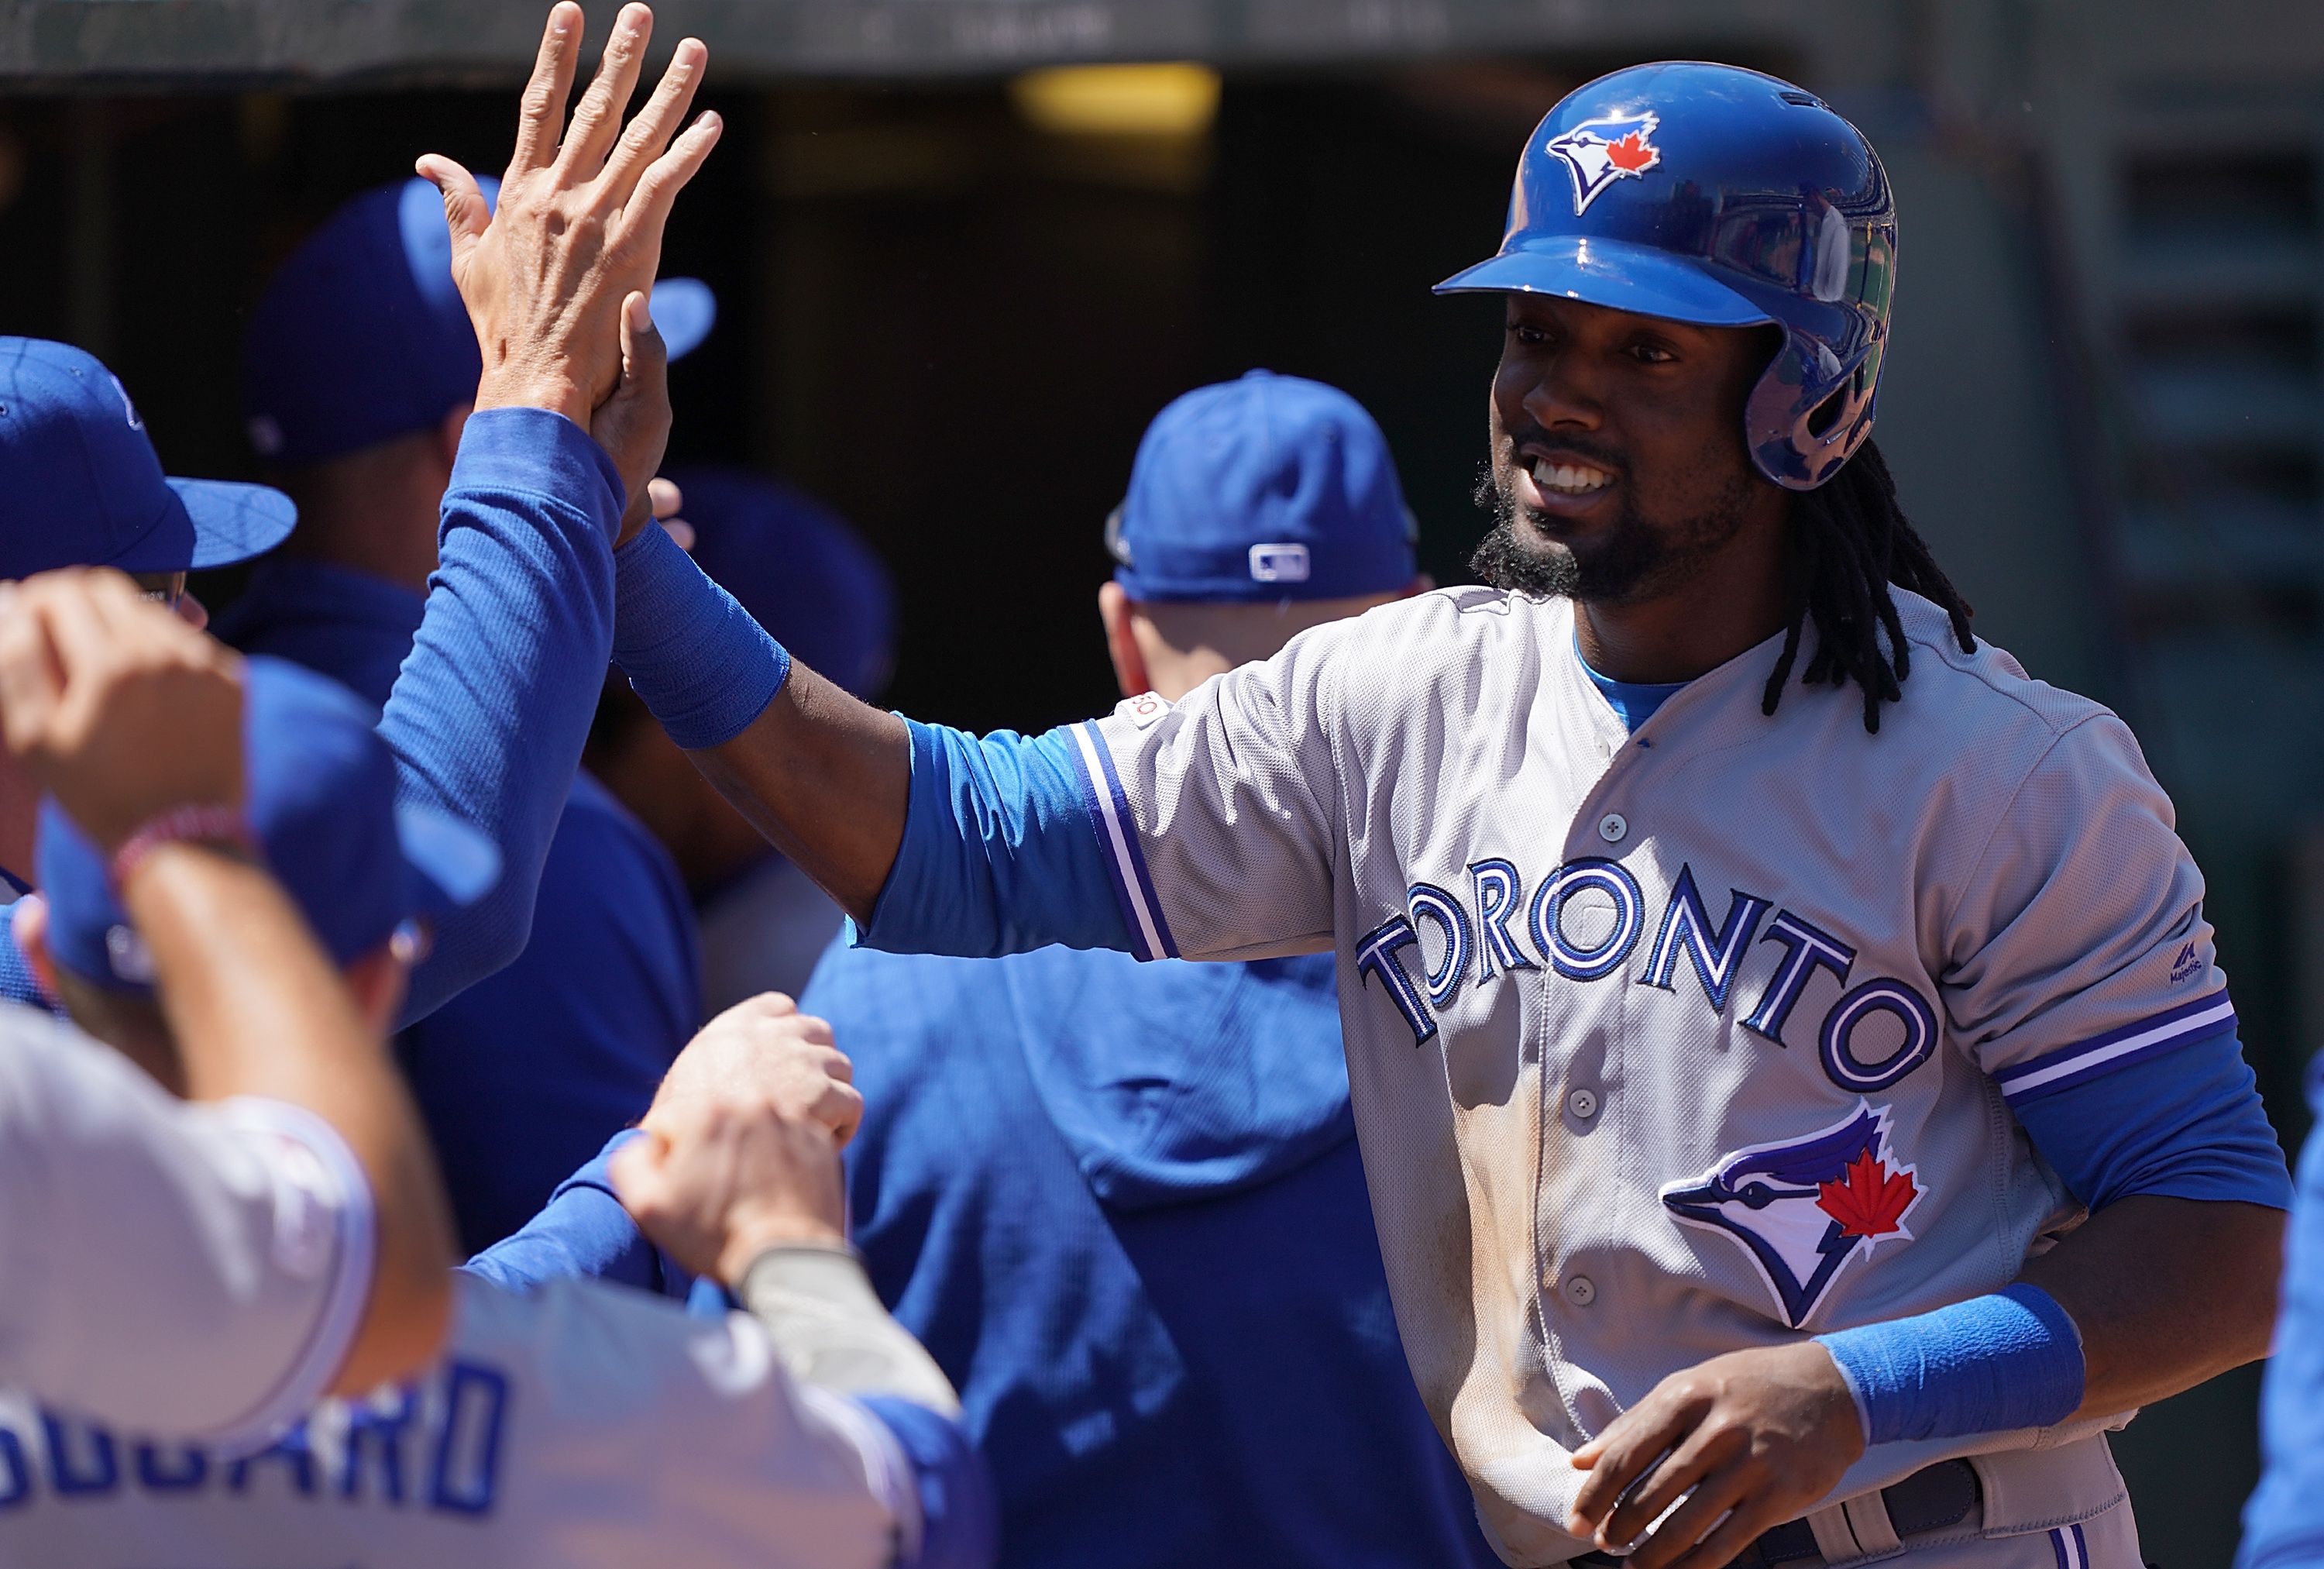 Opinion: Blue Jays final result a devastating blow for team and